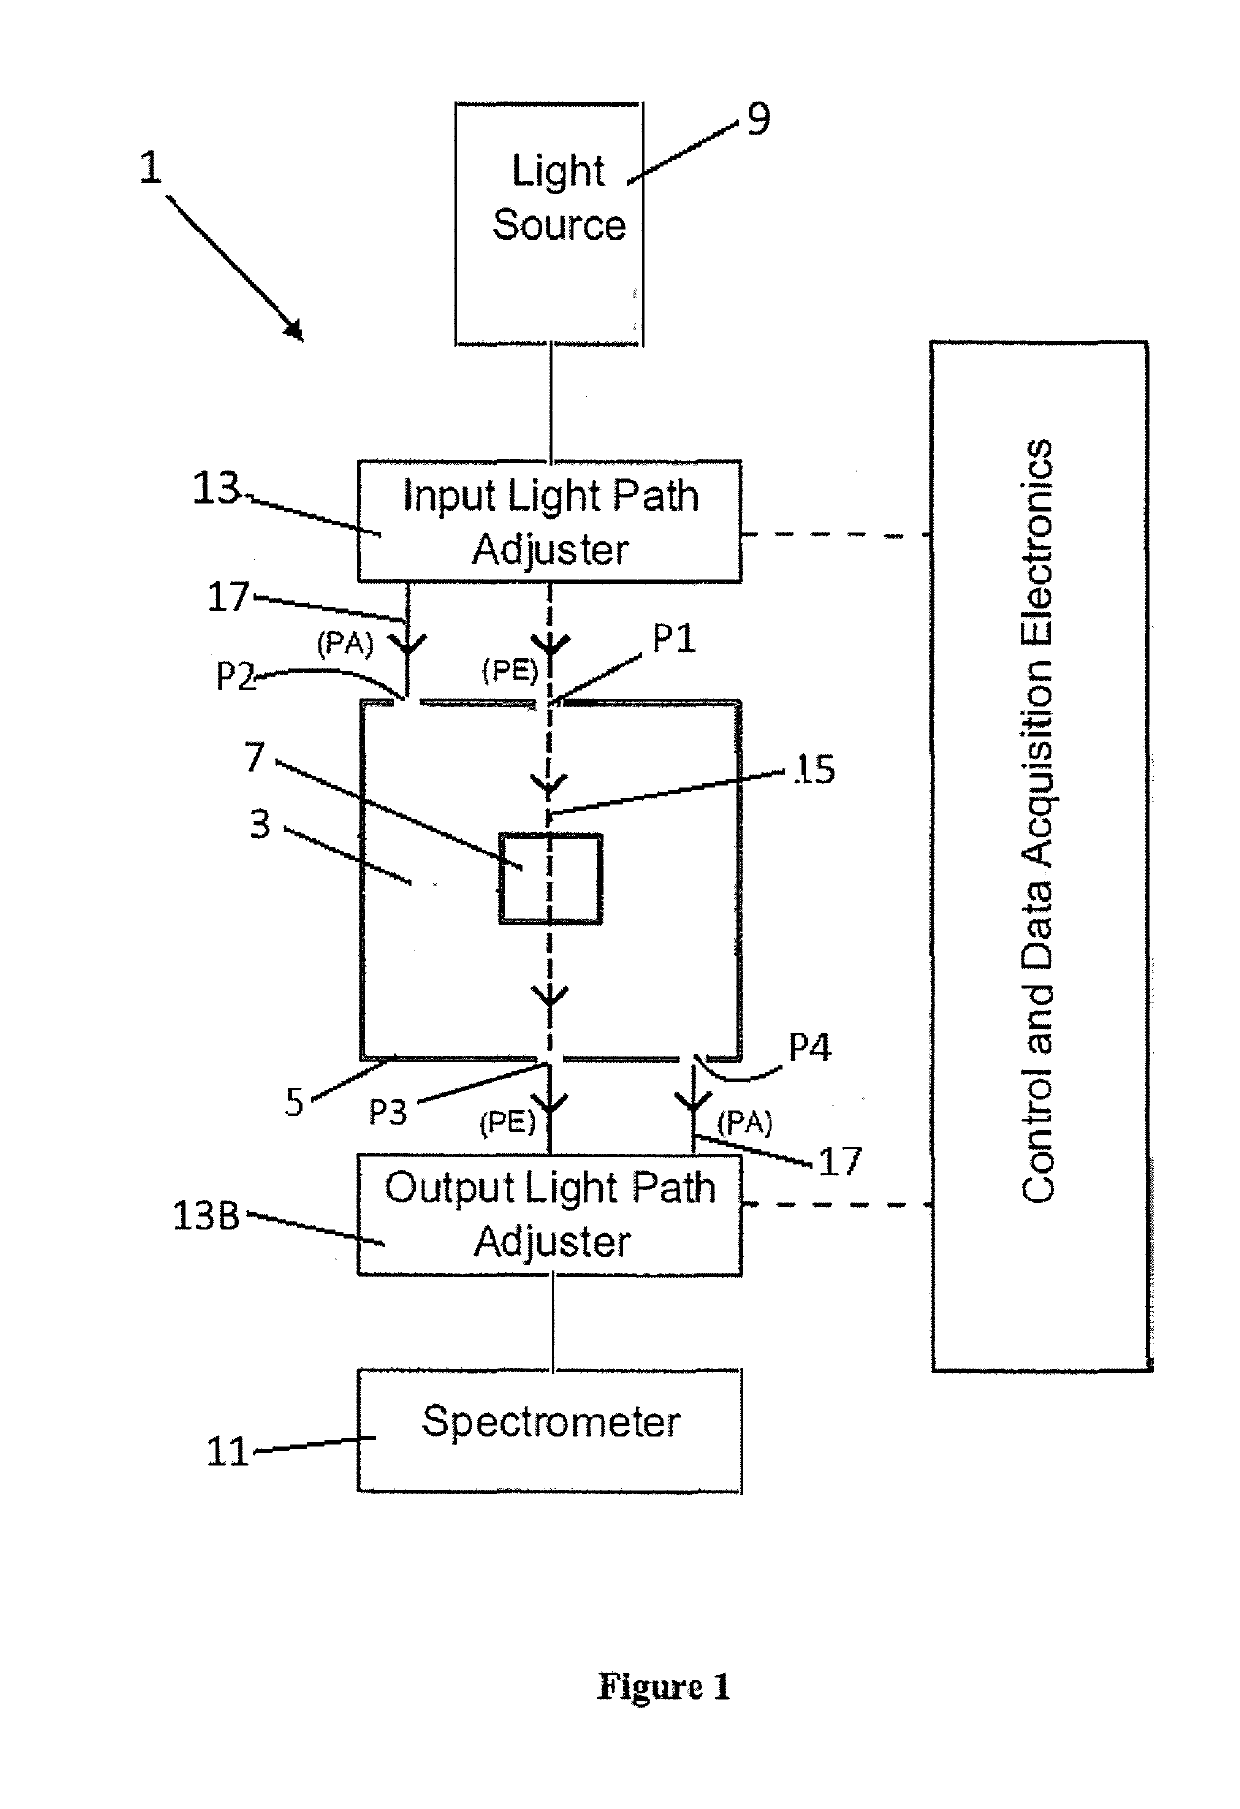 A spectrometer apparatus for measuring spectra of a liquid sample using an integrating cavity